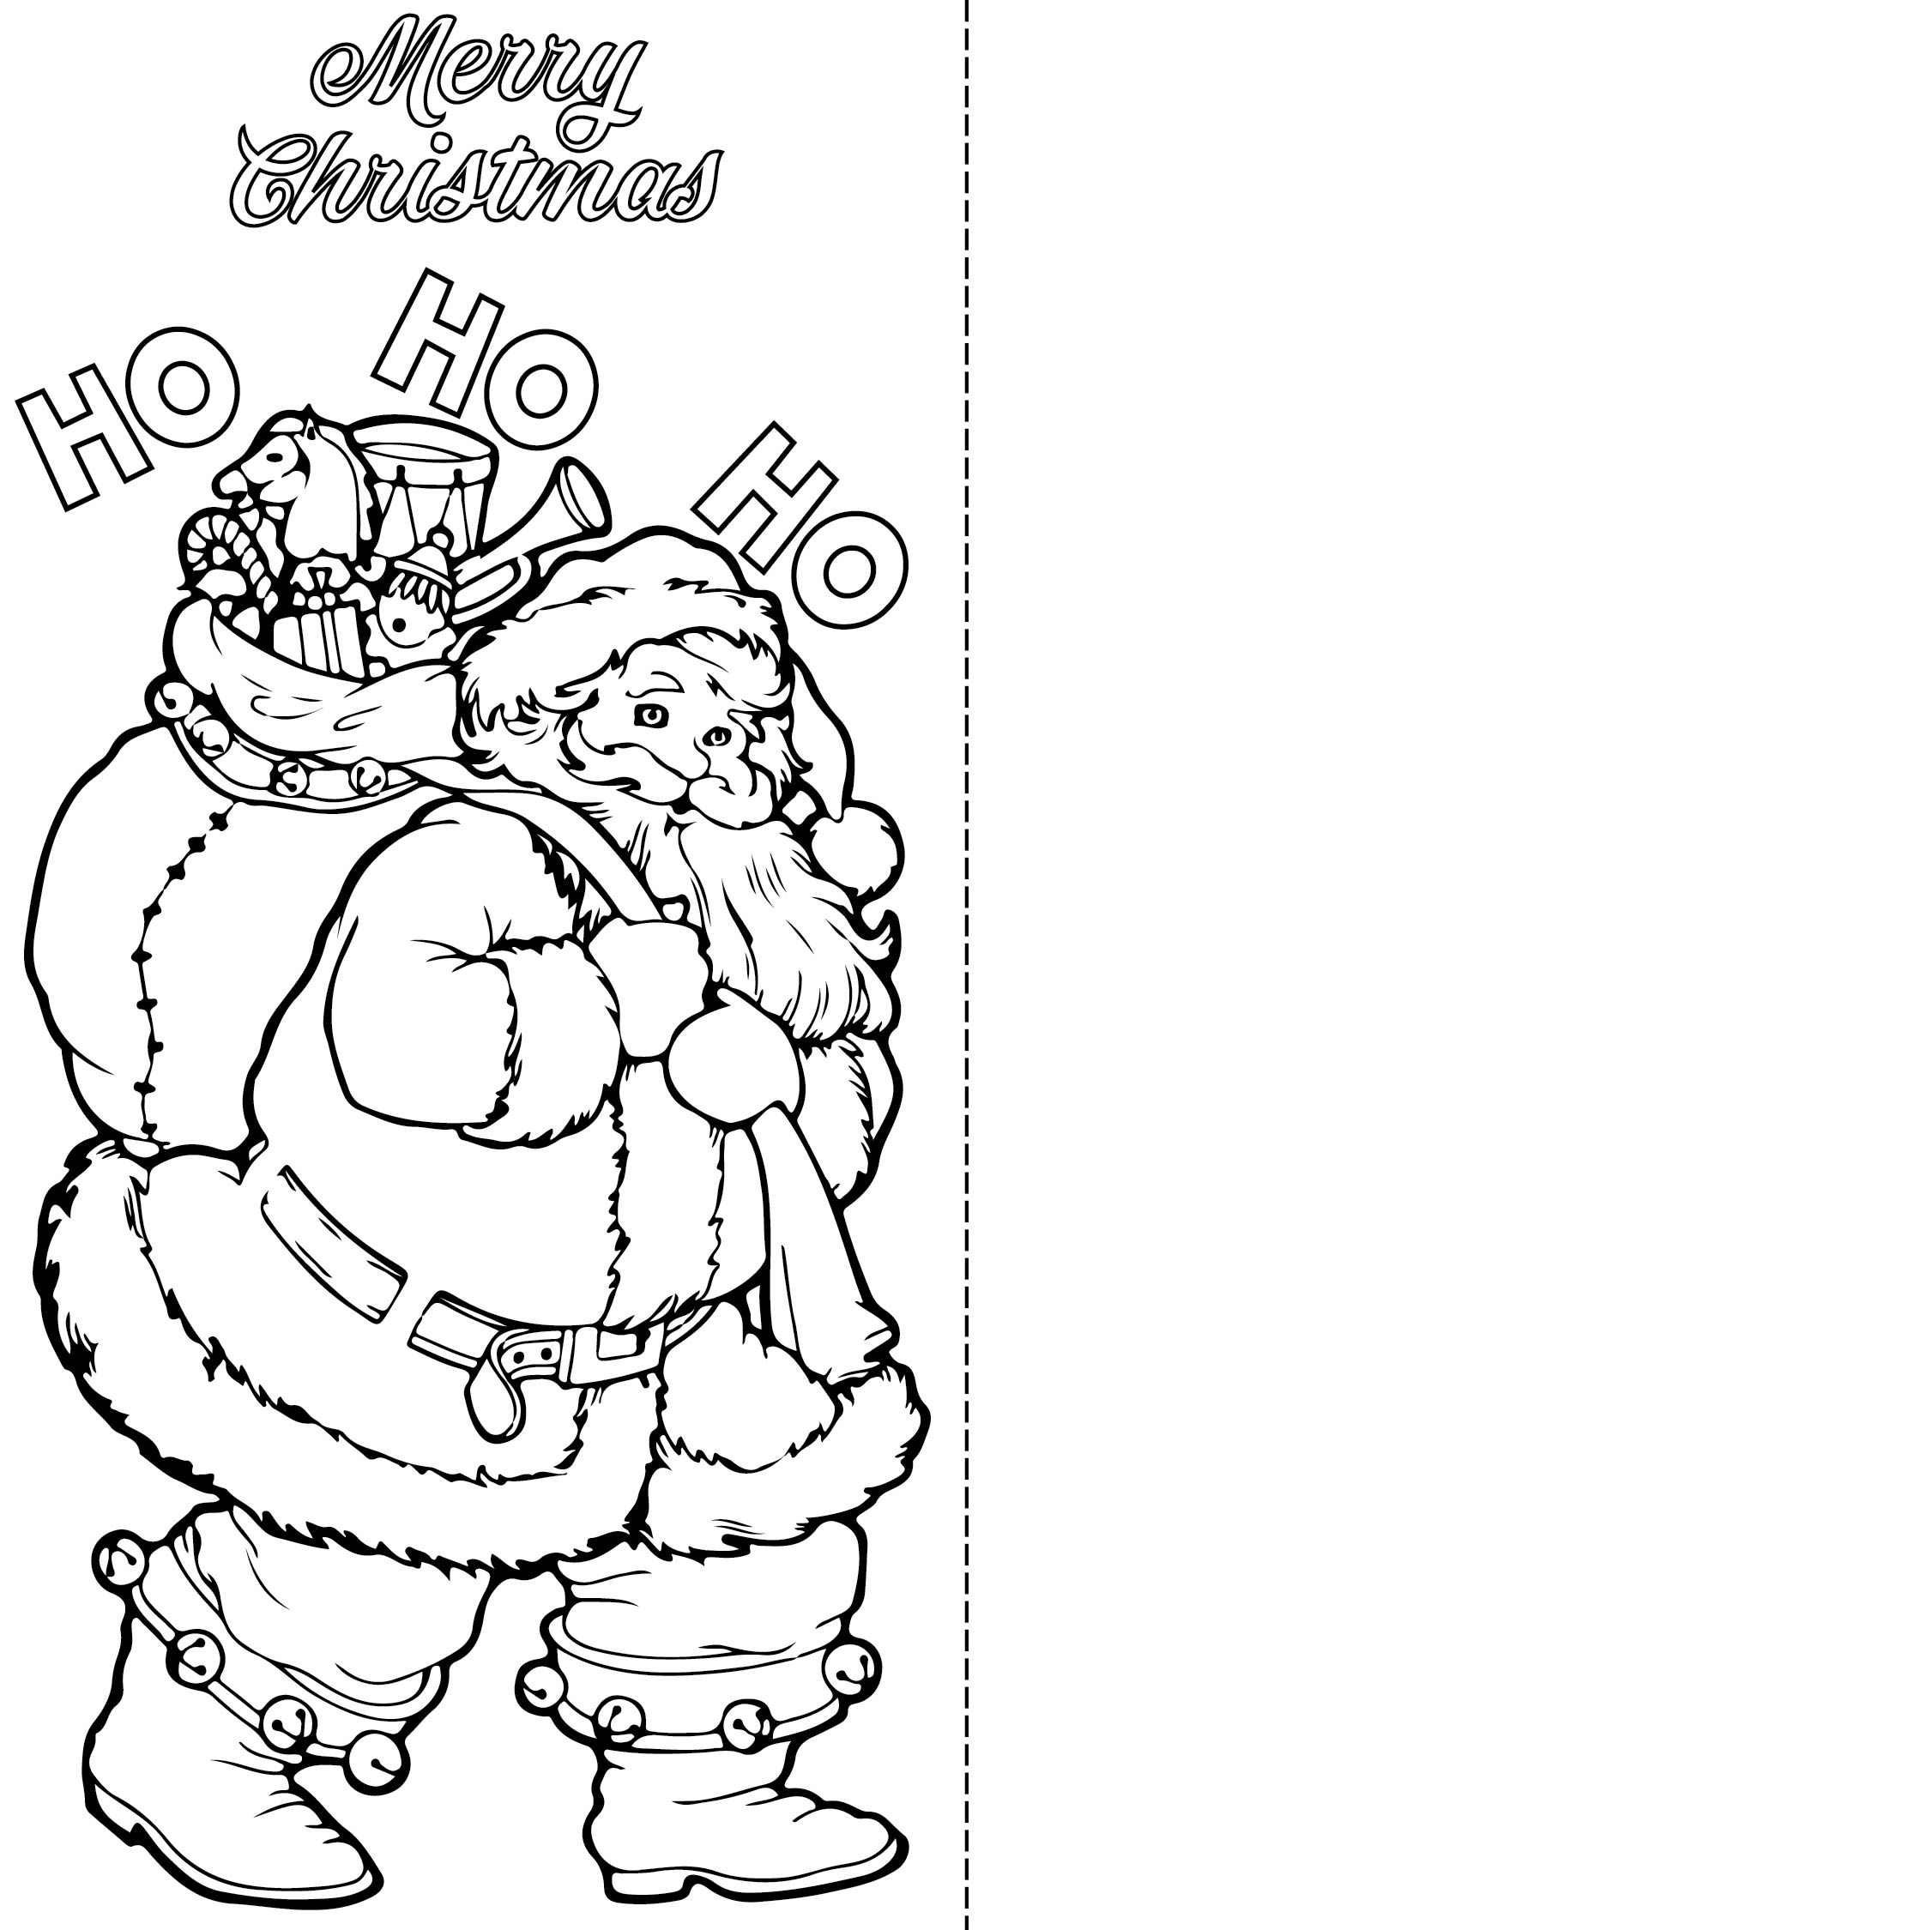 this-free-printable-christmas-card-is-fun-to-color-in-and-a-great-way